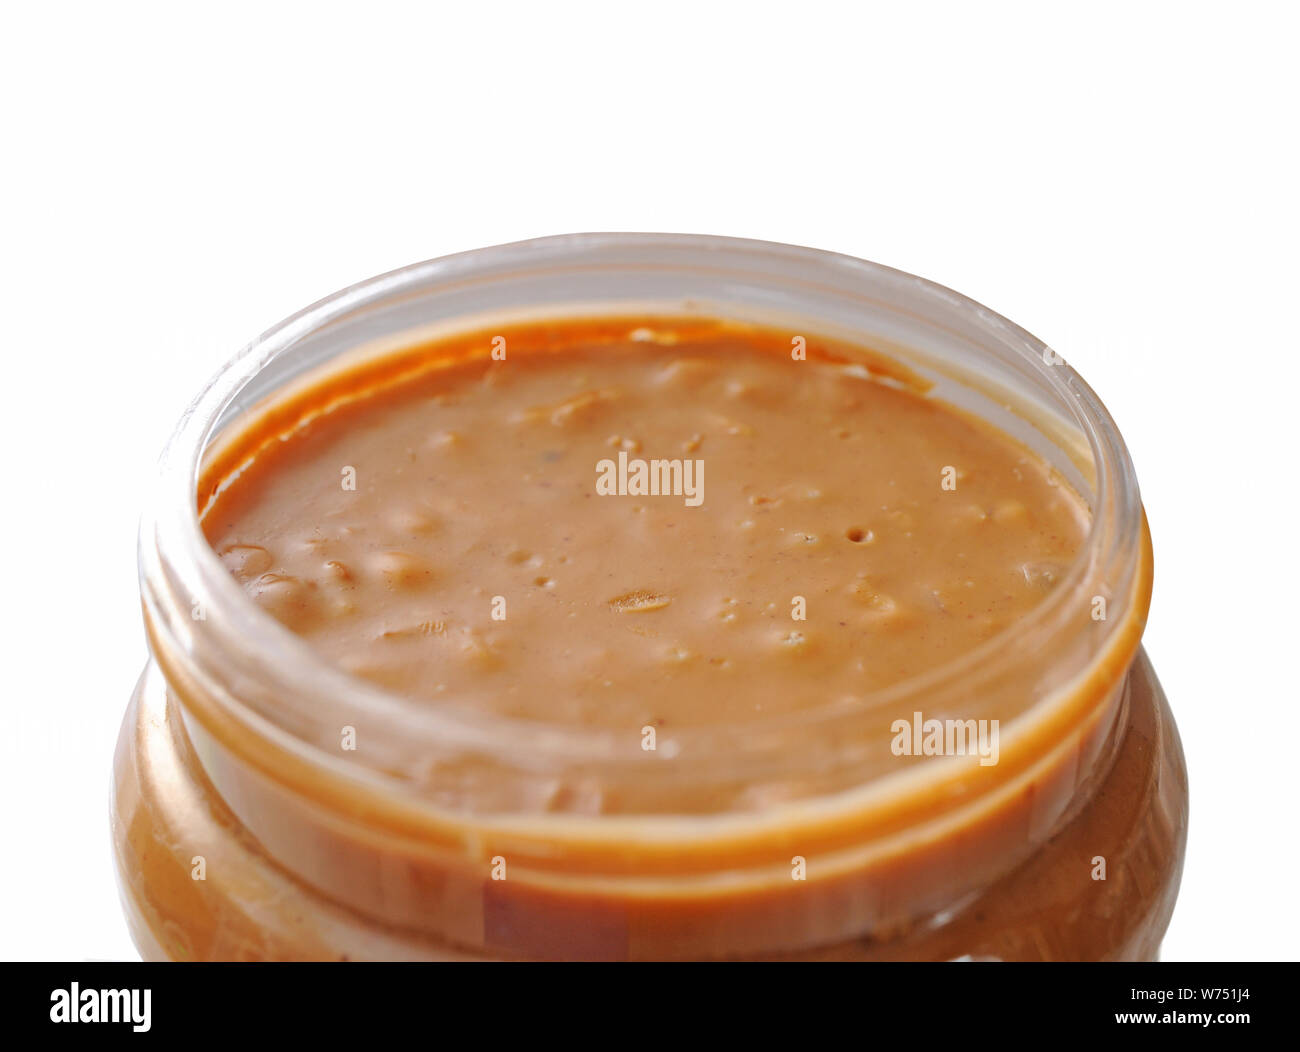 Download Closeup Of Opened Peanut Butter Jar Stock Photo Alamy Yellowimages Mockups